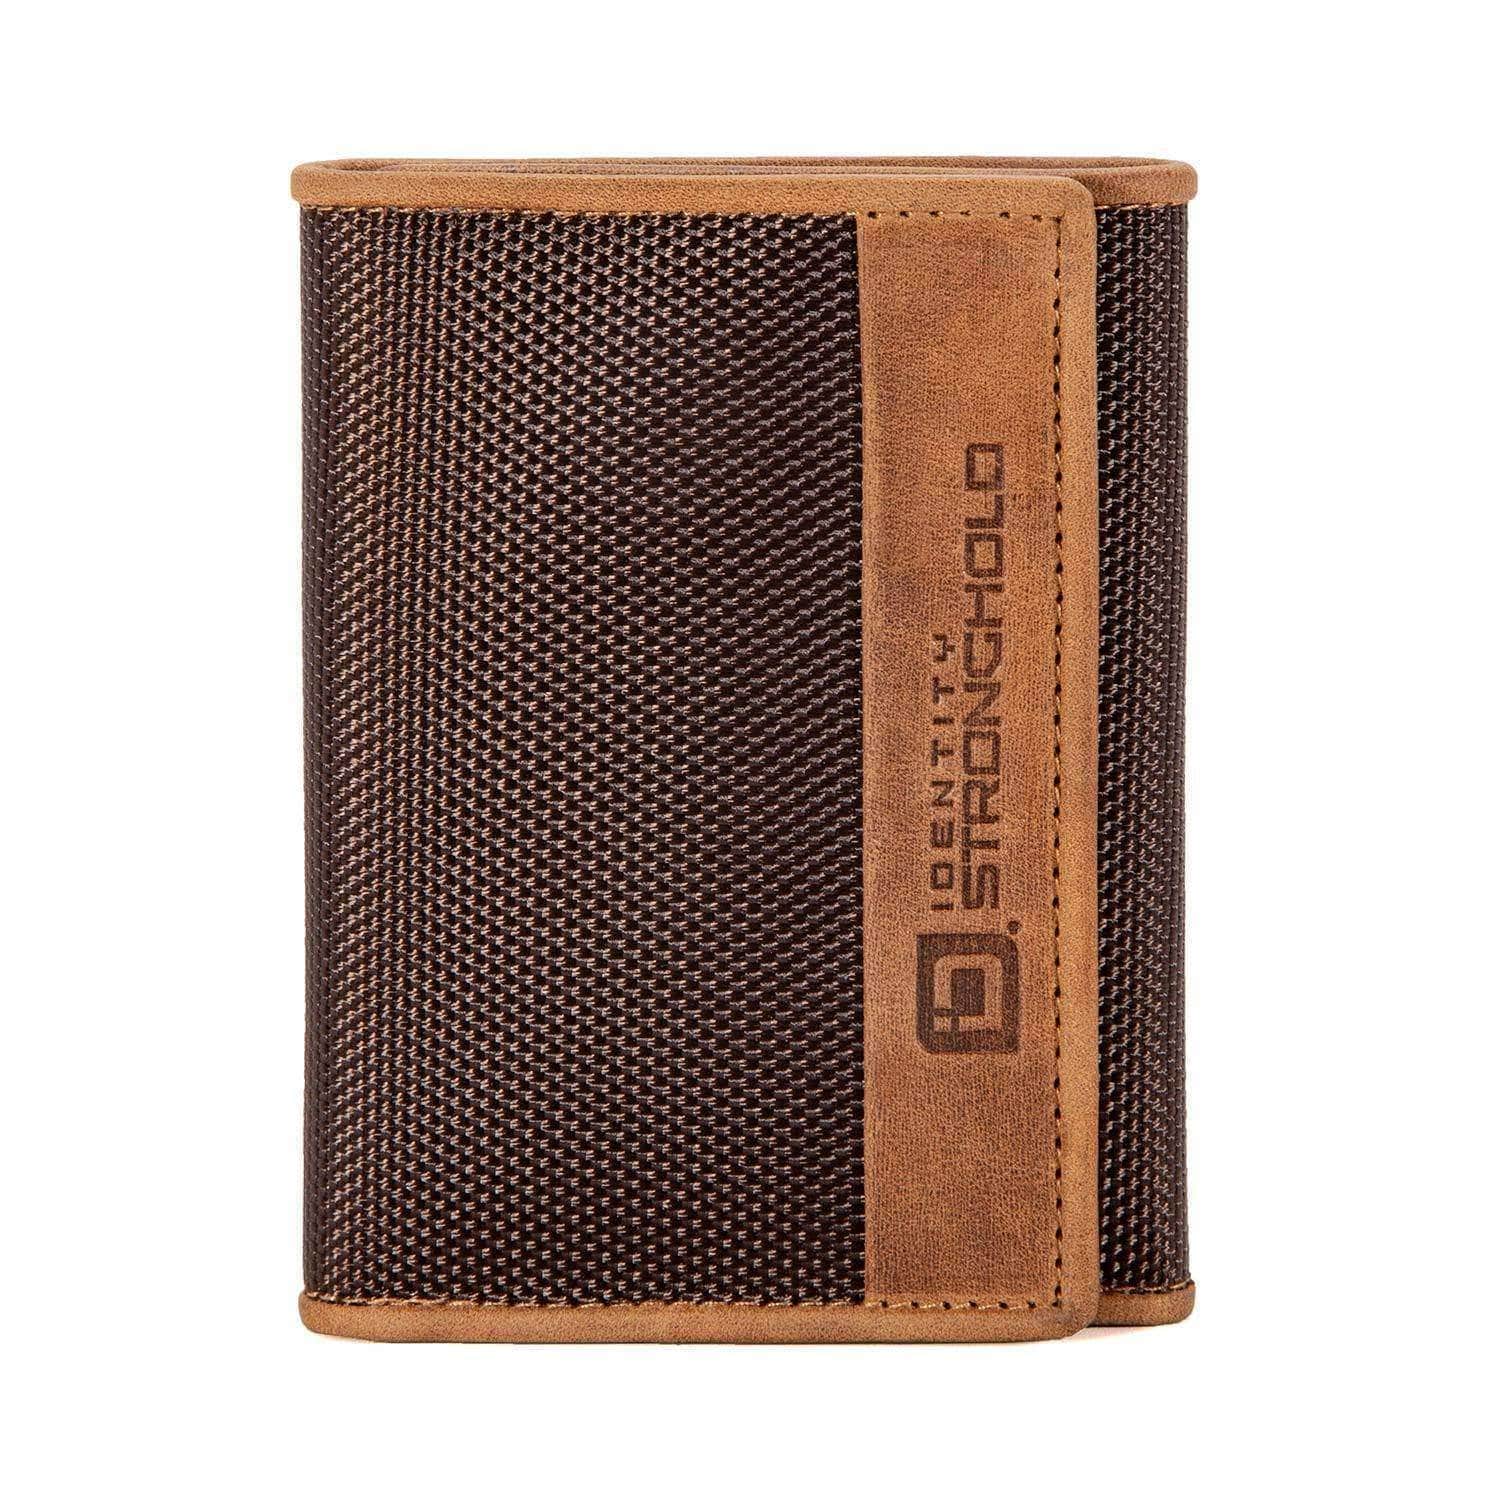 Bobbies - Small leather goods for men - Wallet, card and pocket holder